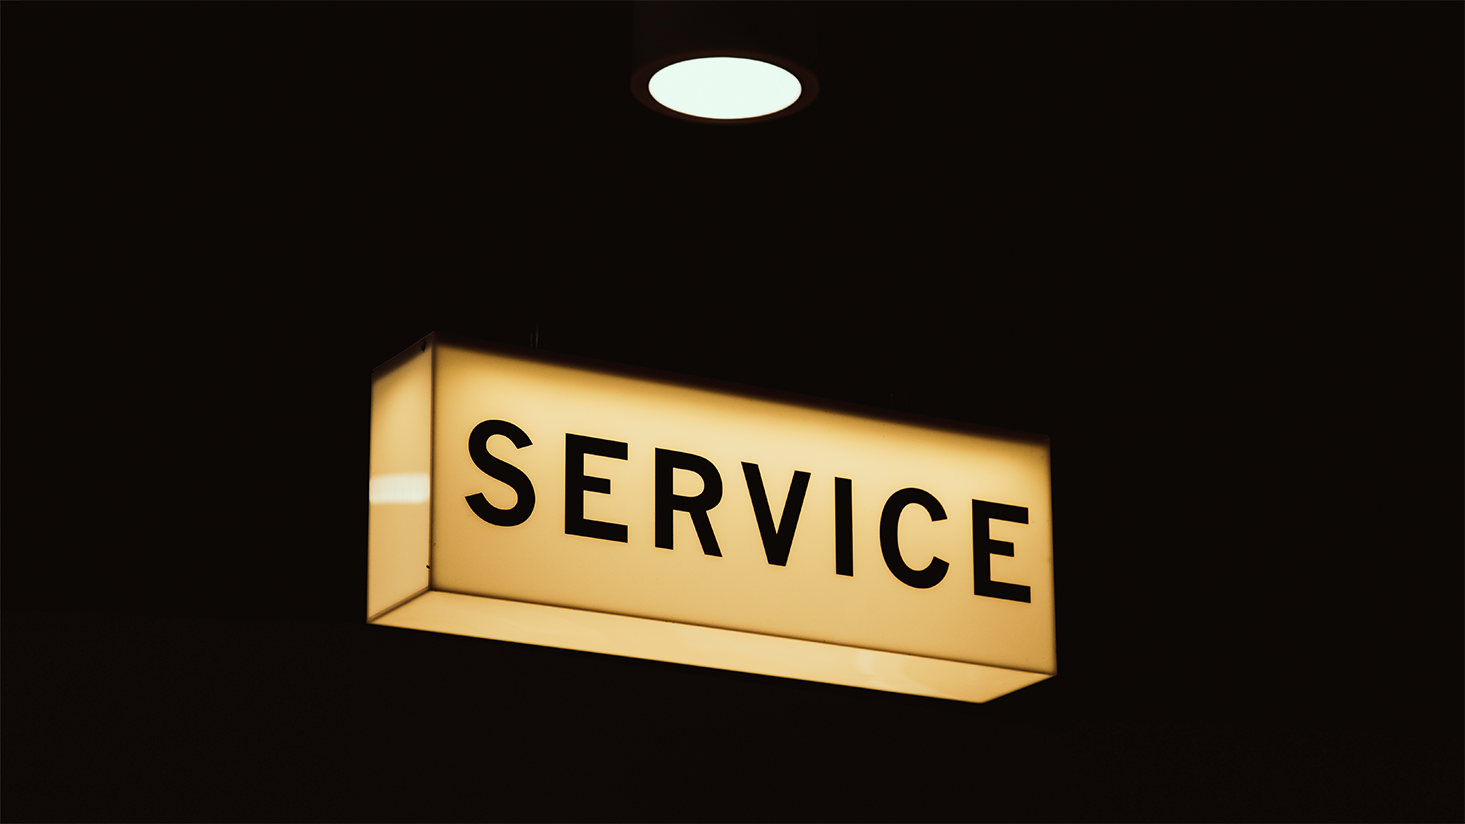 Lighting-as-a-service-market-is-expected-to-grow-46.3.png